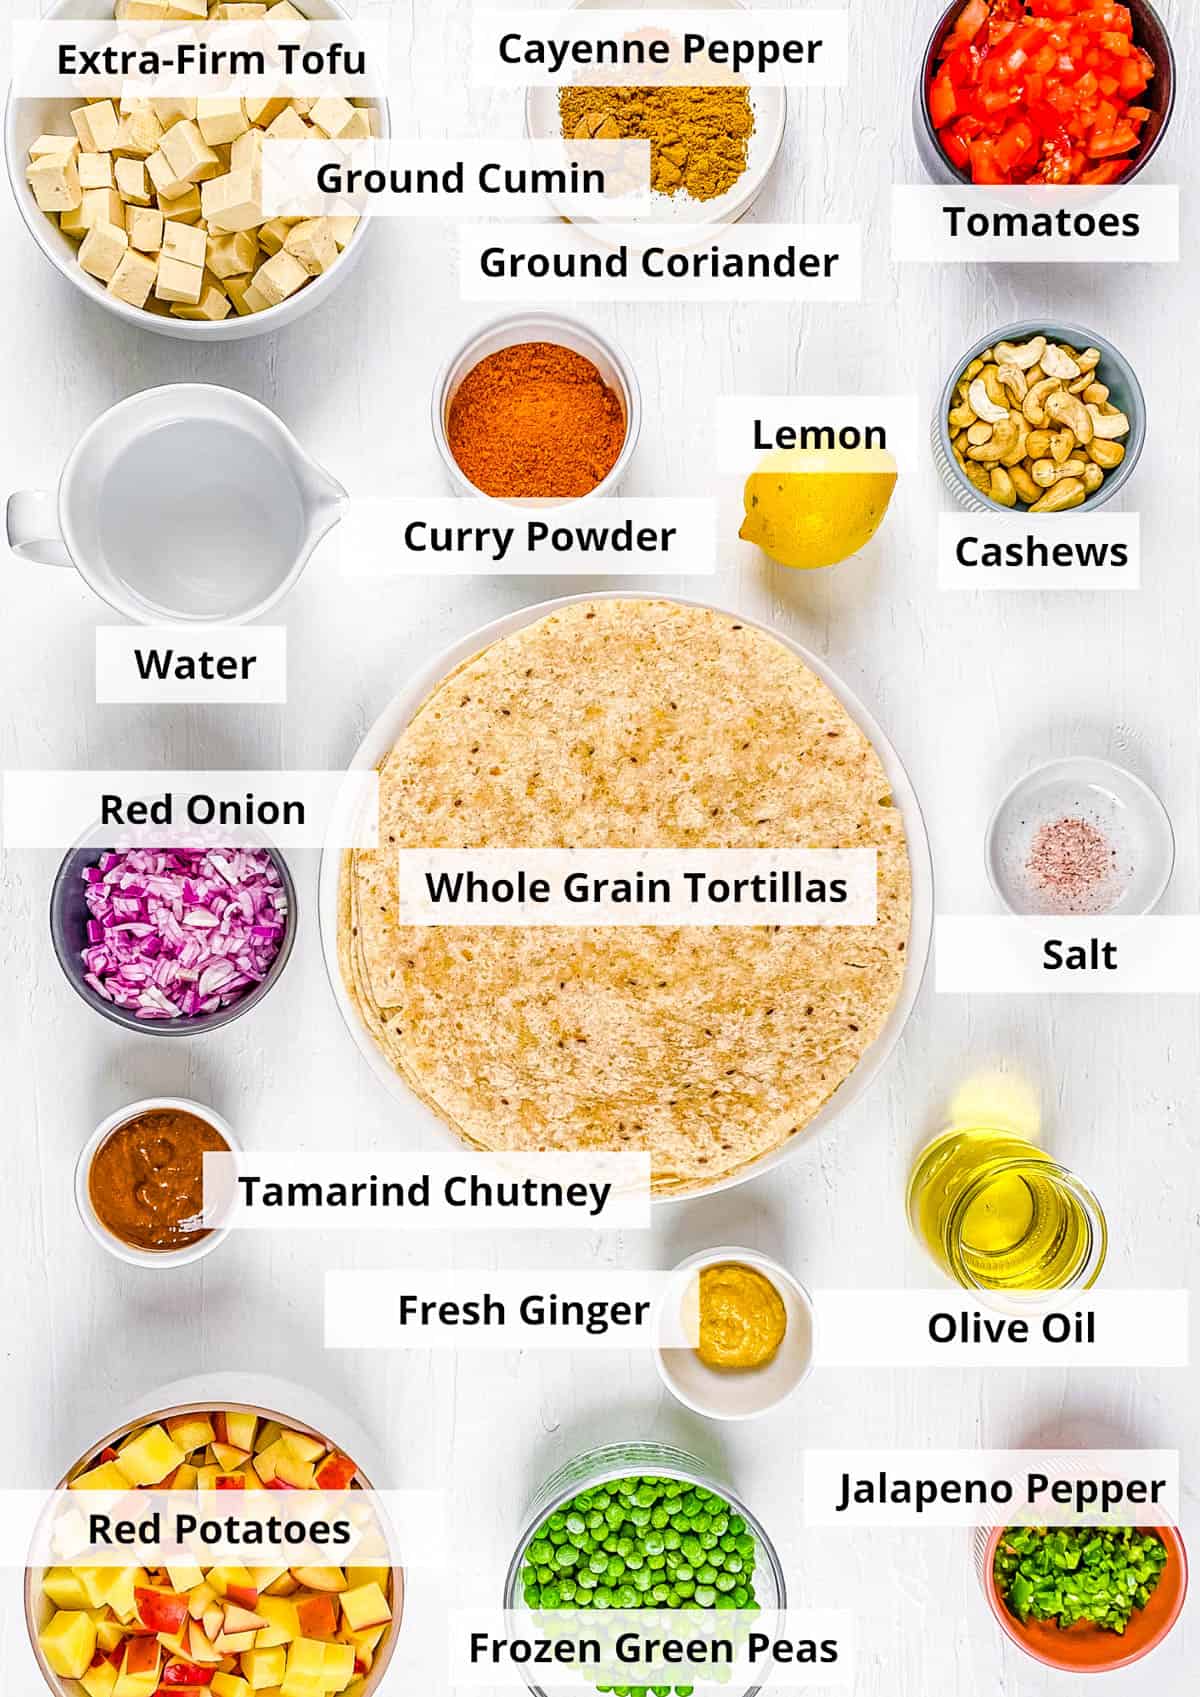 Ingredients for Indian samosa wraps on a white background.